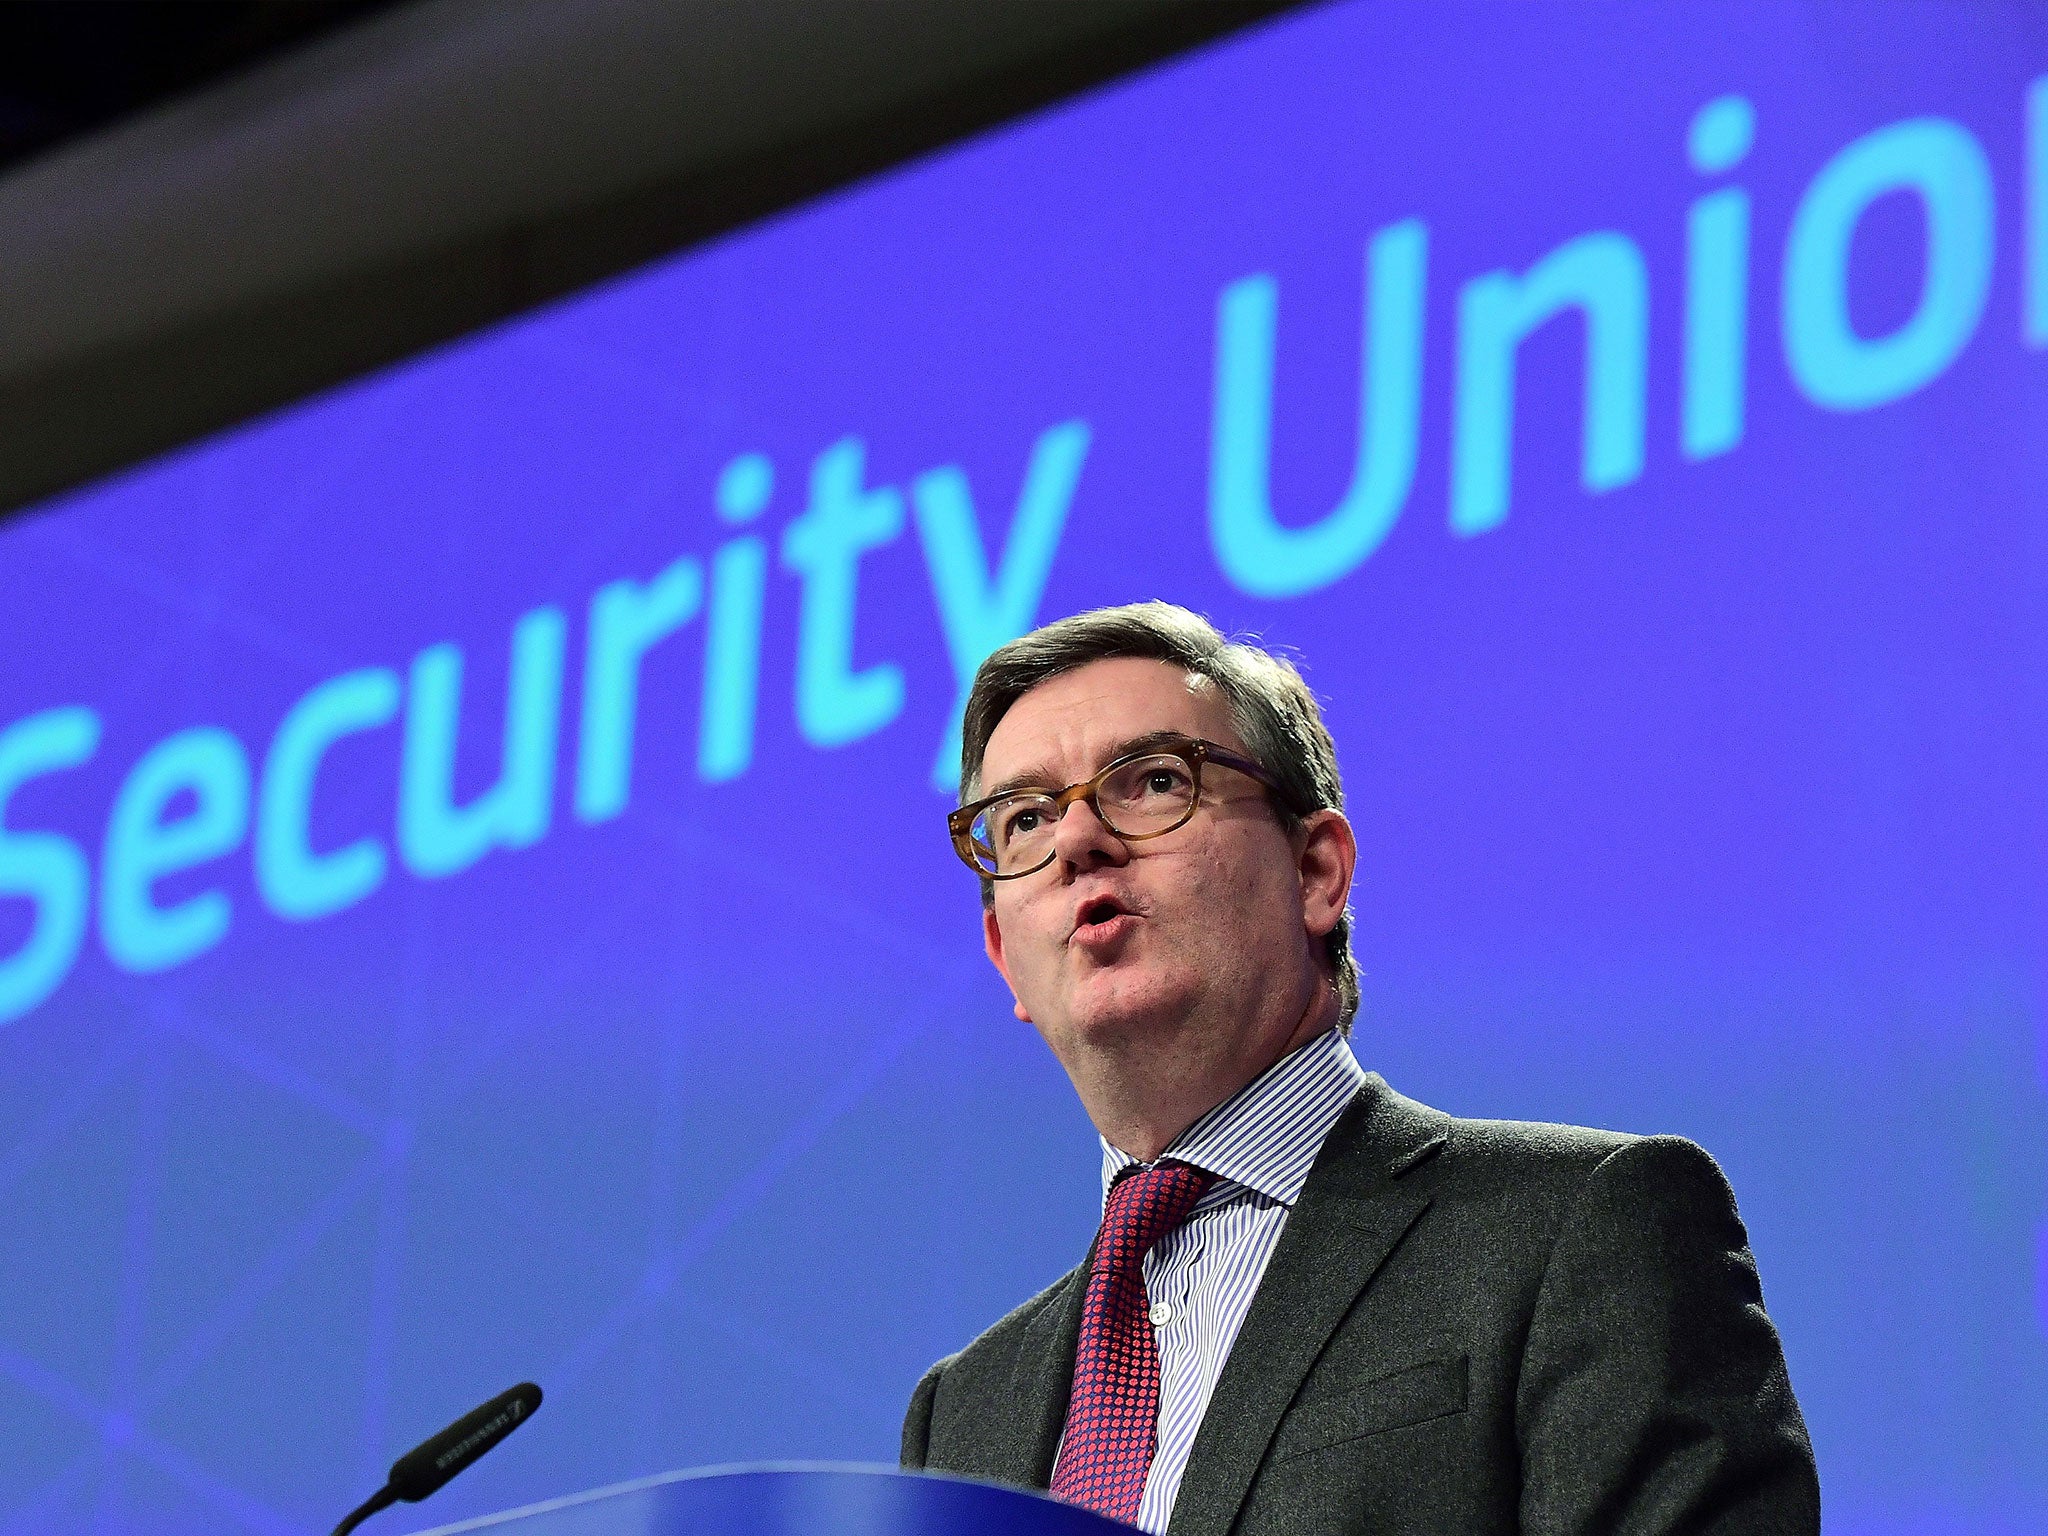 European Commissioner for Security Julian King